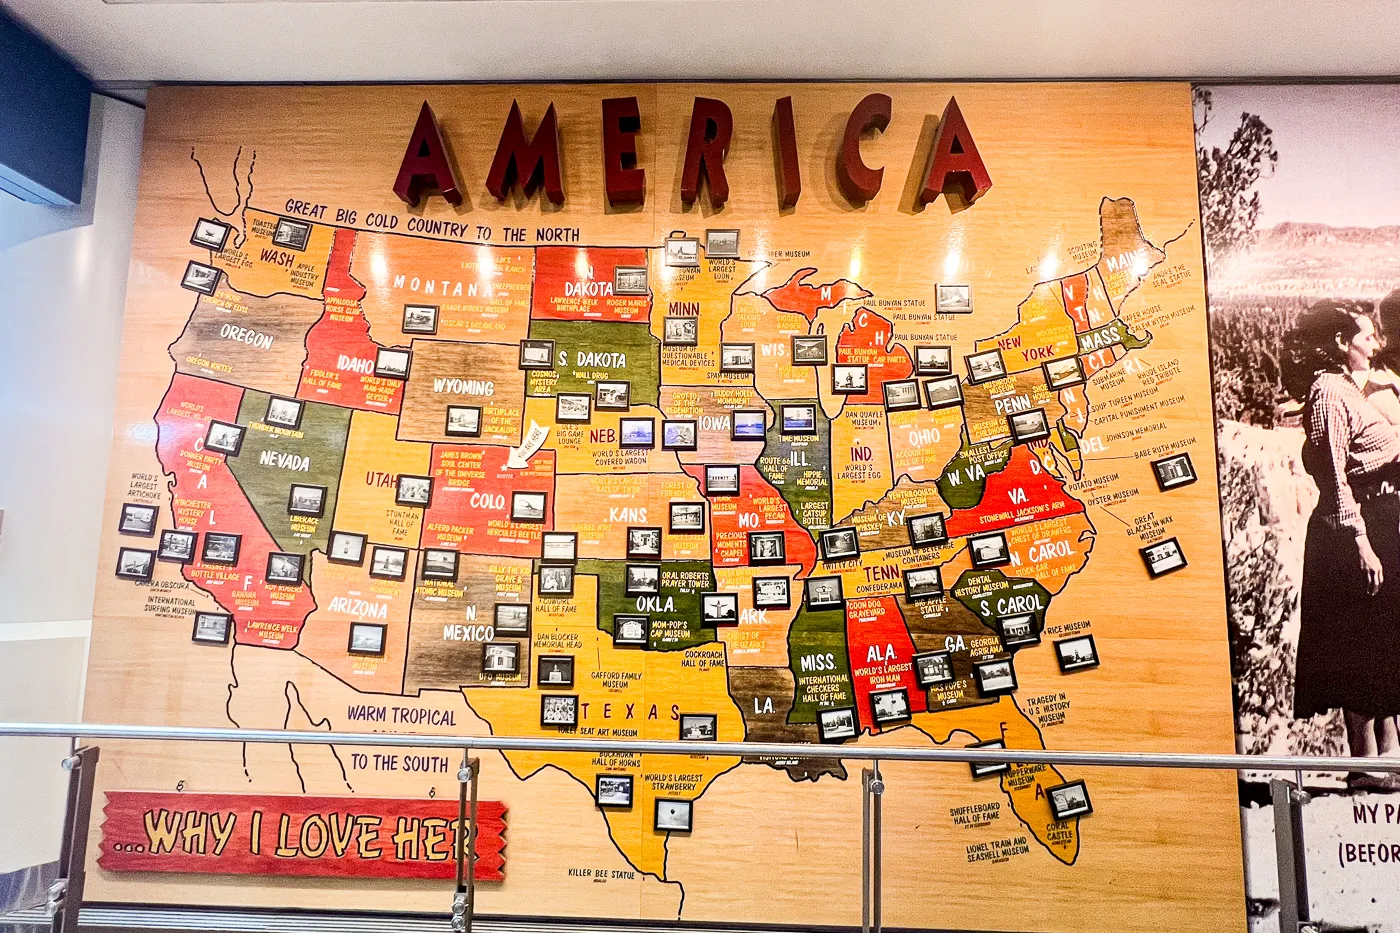 America, Why I Love Her - Roadside Attraction Map at Denver International Airport in Colorado